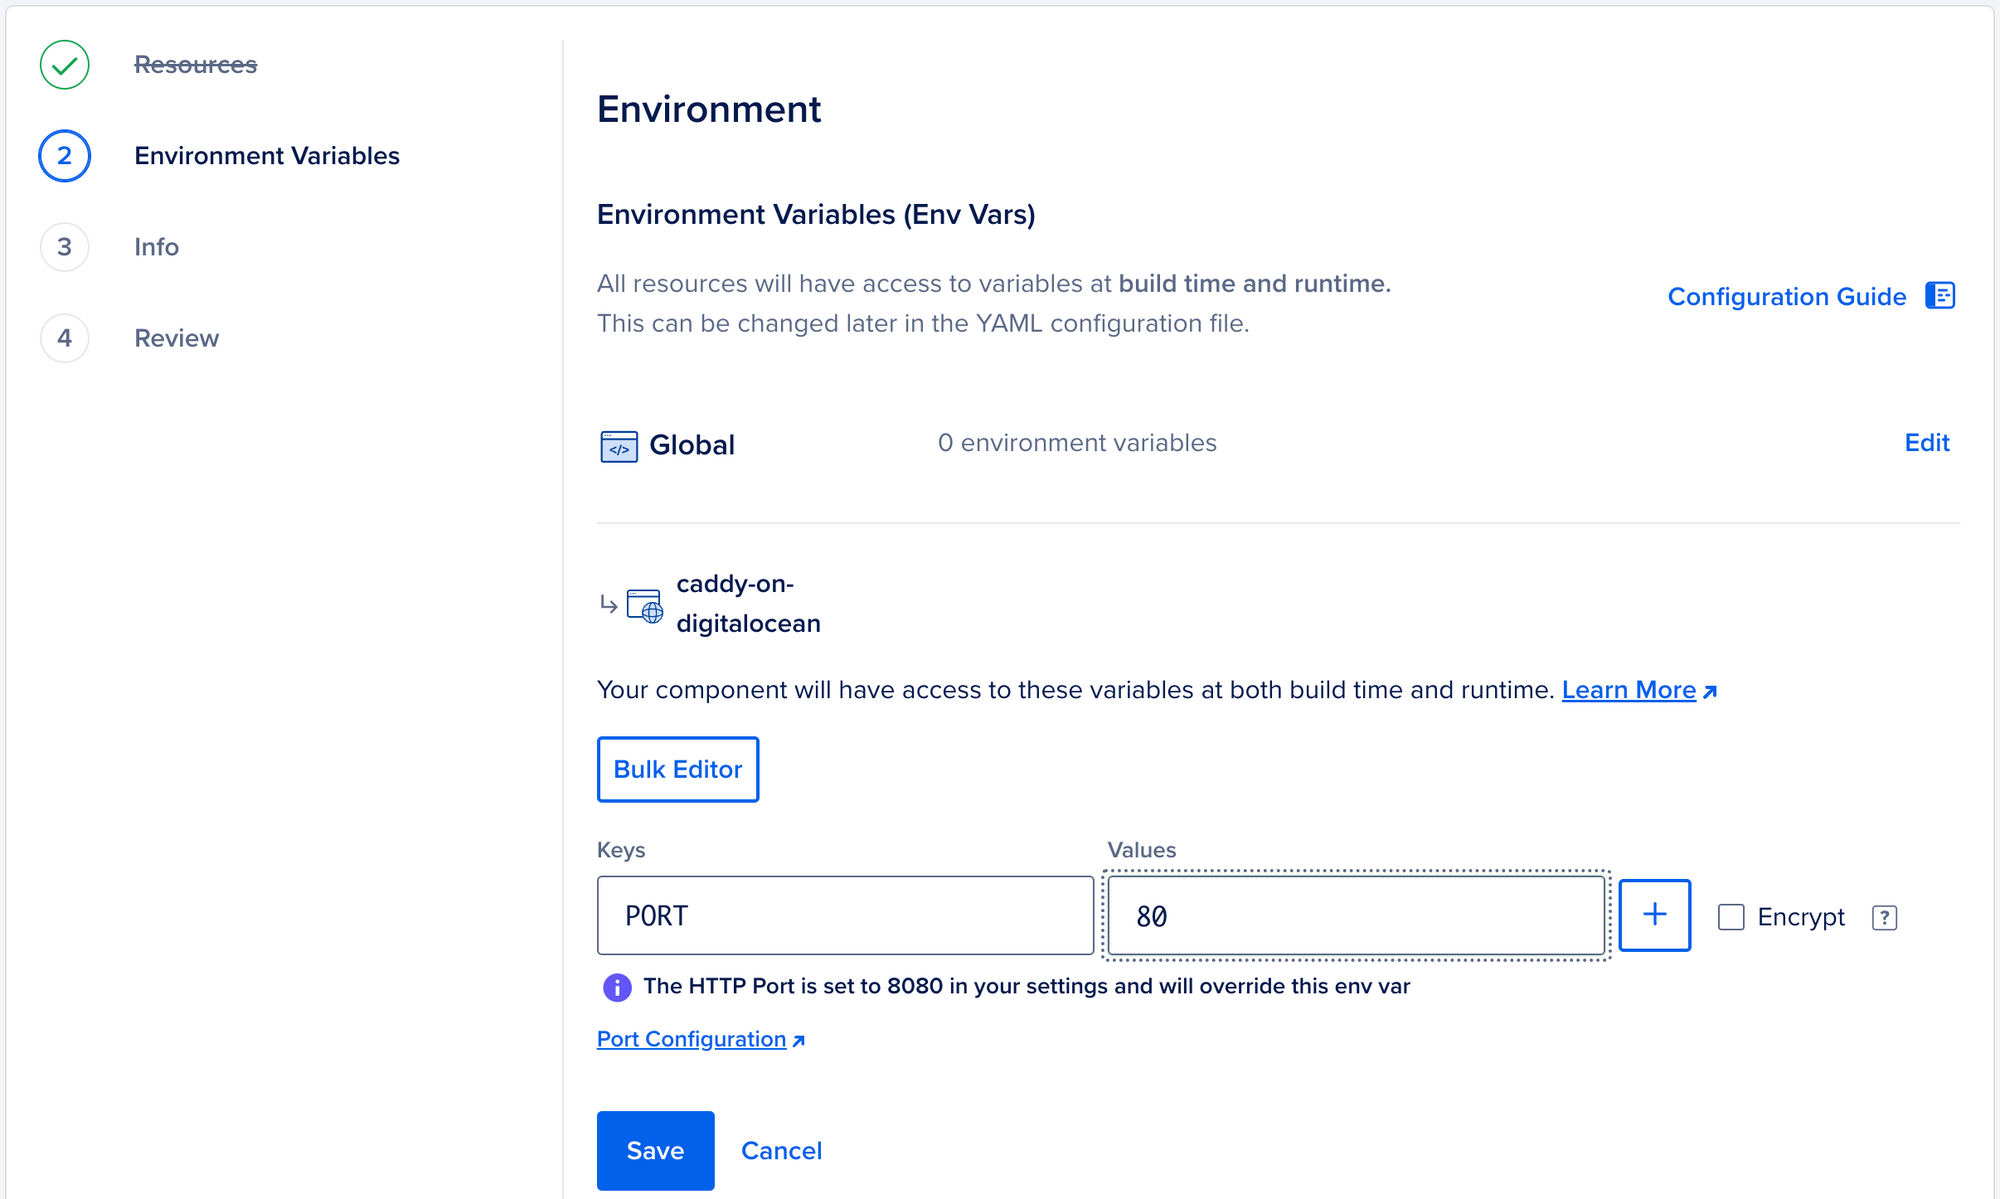 Global and local environment variables